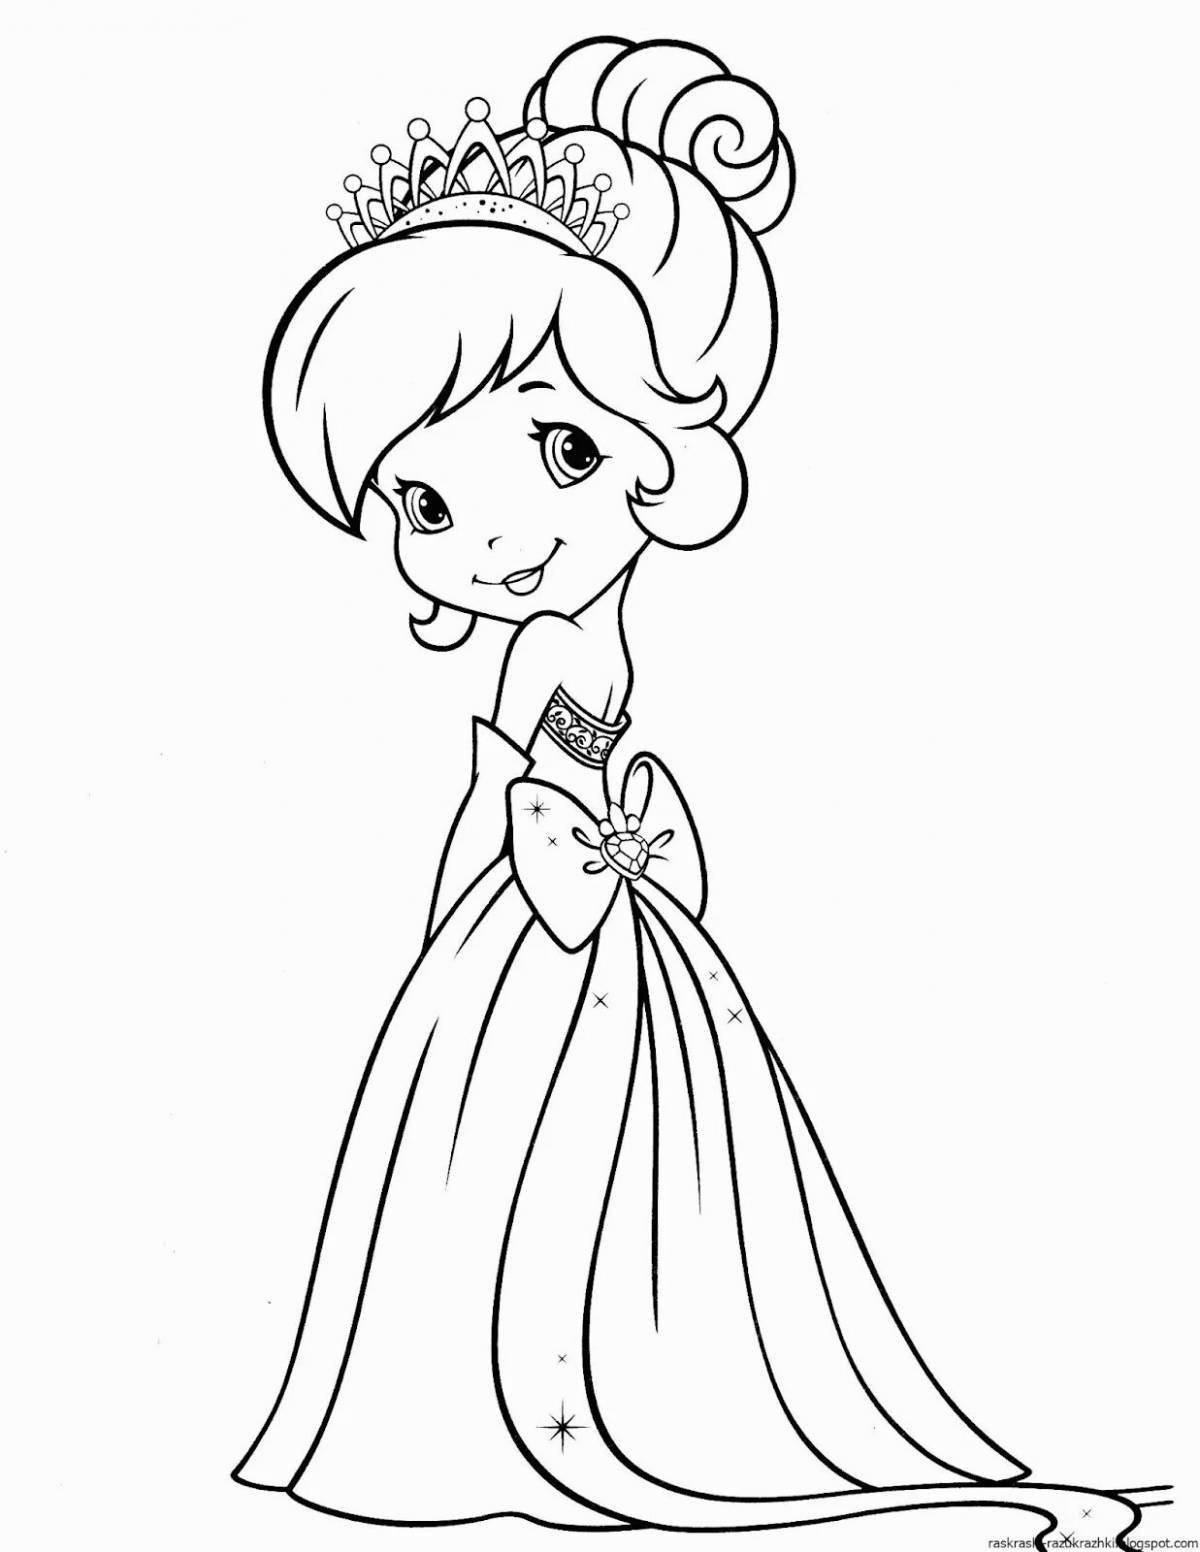 Fancy princess coloring pages for girls 4-5 years old